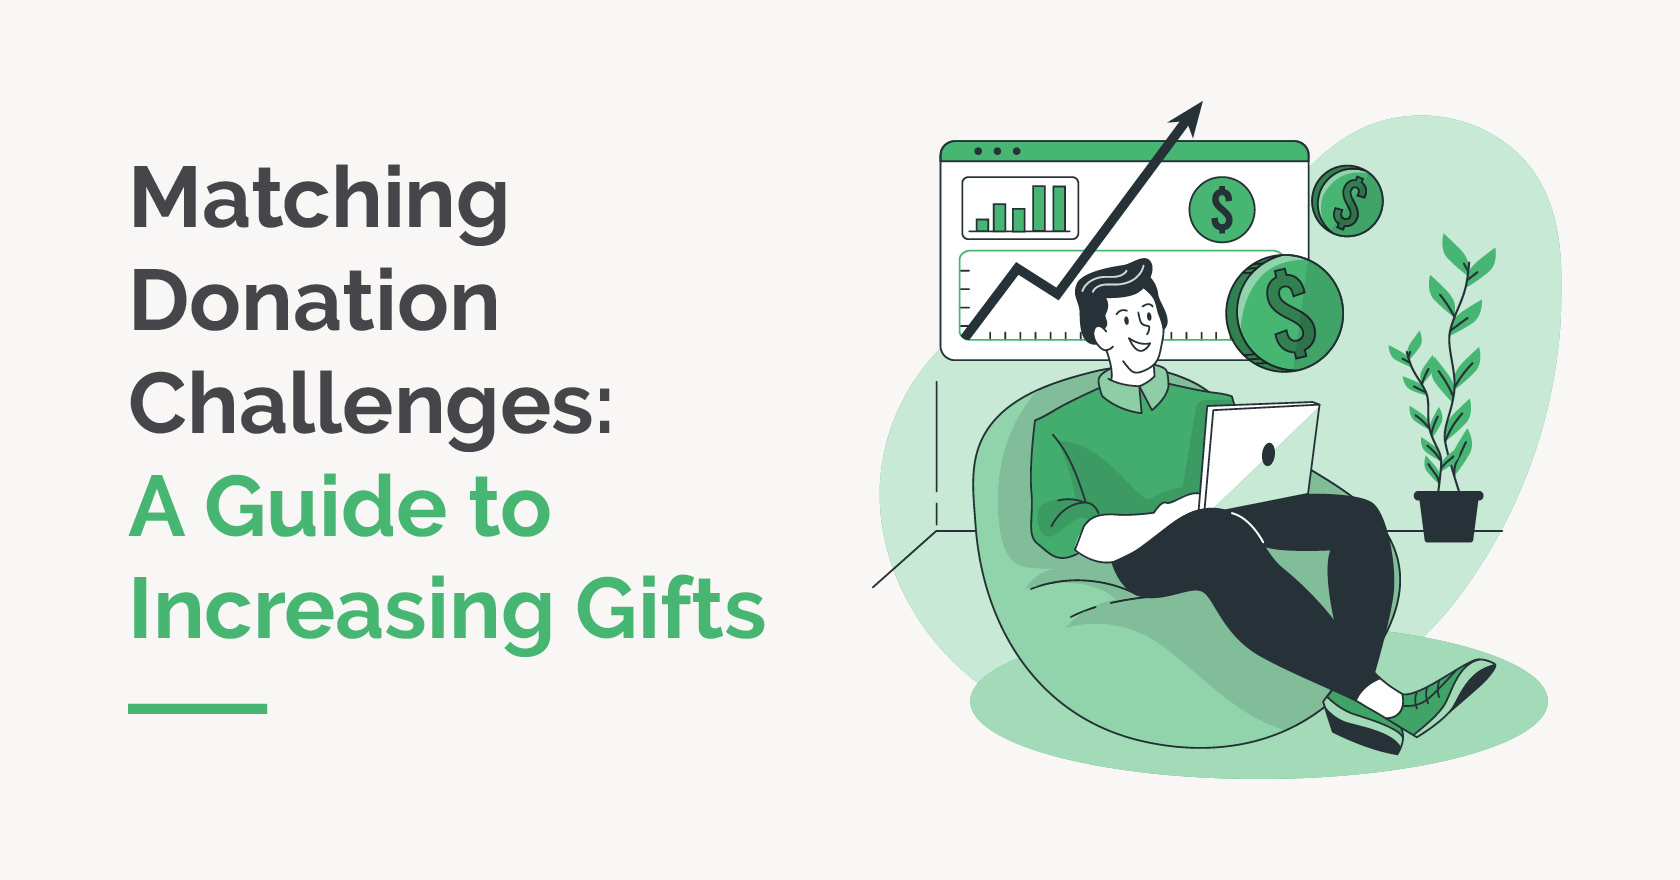 Matching Donation Challenges: A Guide to Increasing Gifts